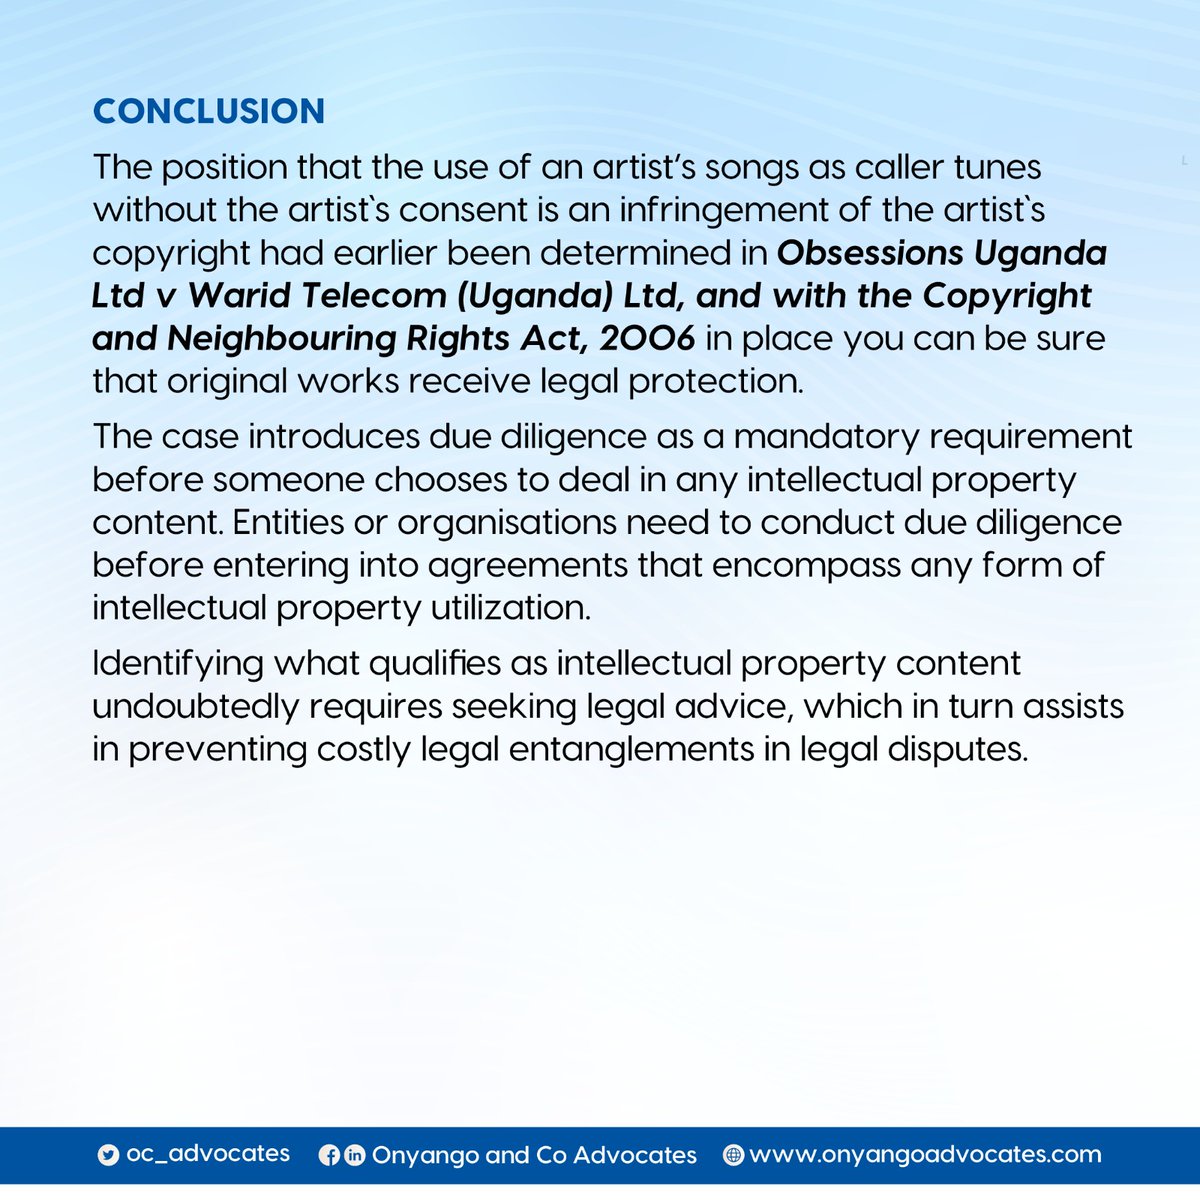 The High Court of Uganda recently delivered a judgement on matters pertaining  to music copyright.

Below, we present a concise overview of some key insights from the judgement.

#copyrightlaw #copyrightinfringement